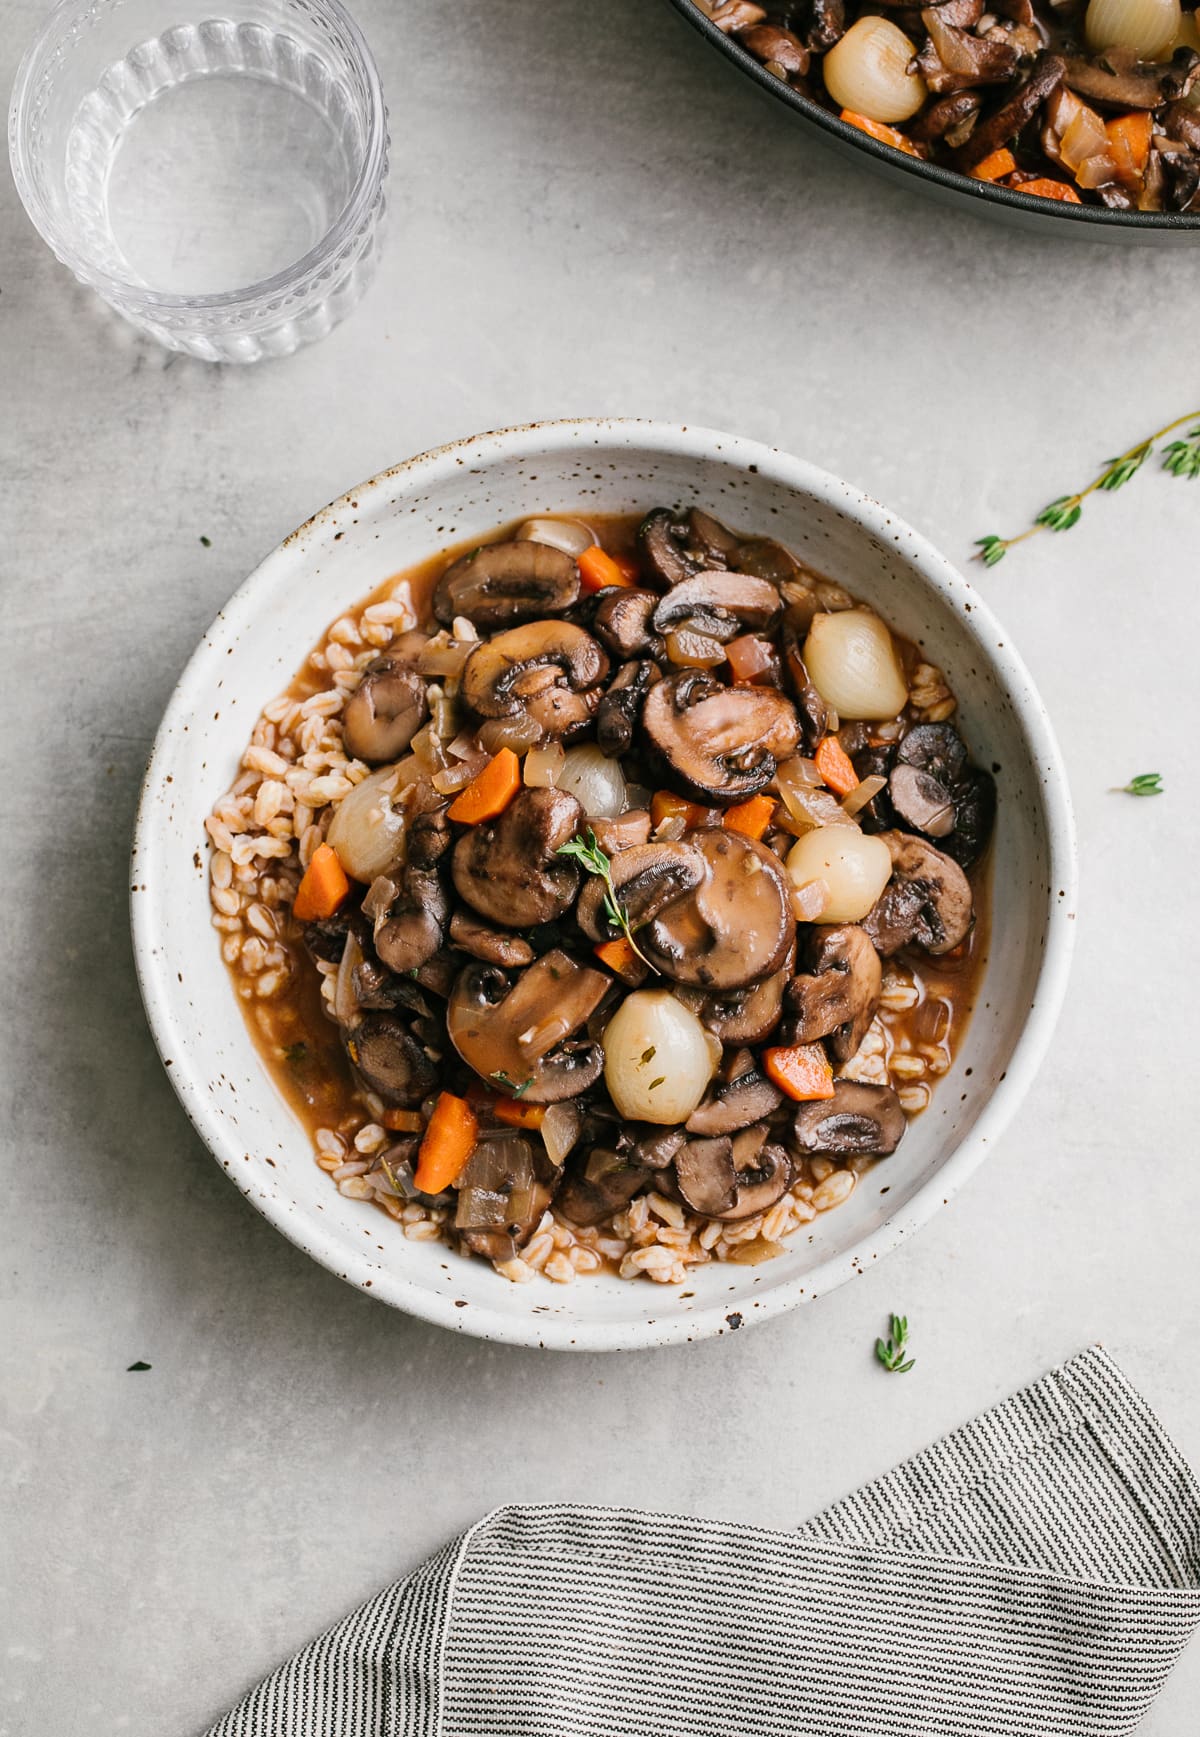 top down view of handmade bowl with a serving of mushroom bourguignon and farro with items surrounding.